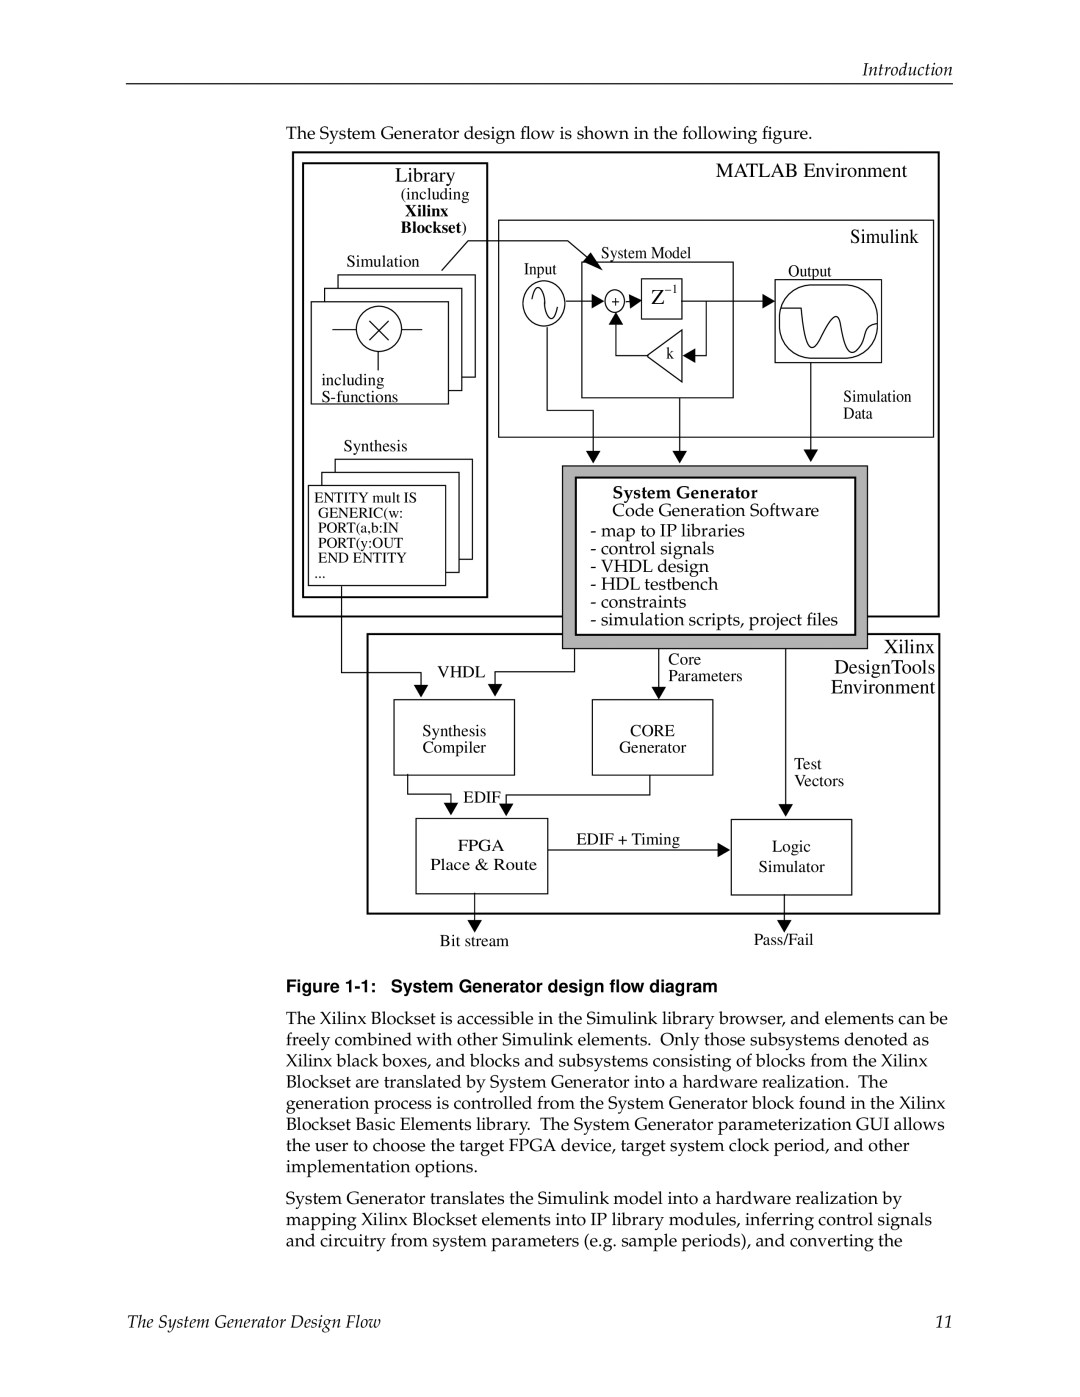 Xilinx V2.1 The System Generator Design Flow, Library, MATLAB Environment, Simulink, Xilinx, DesignTools, Introduction 